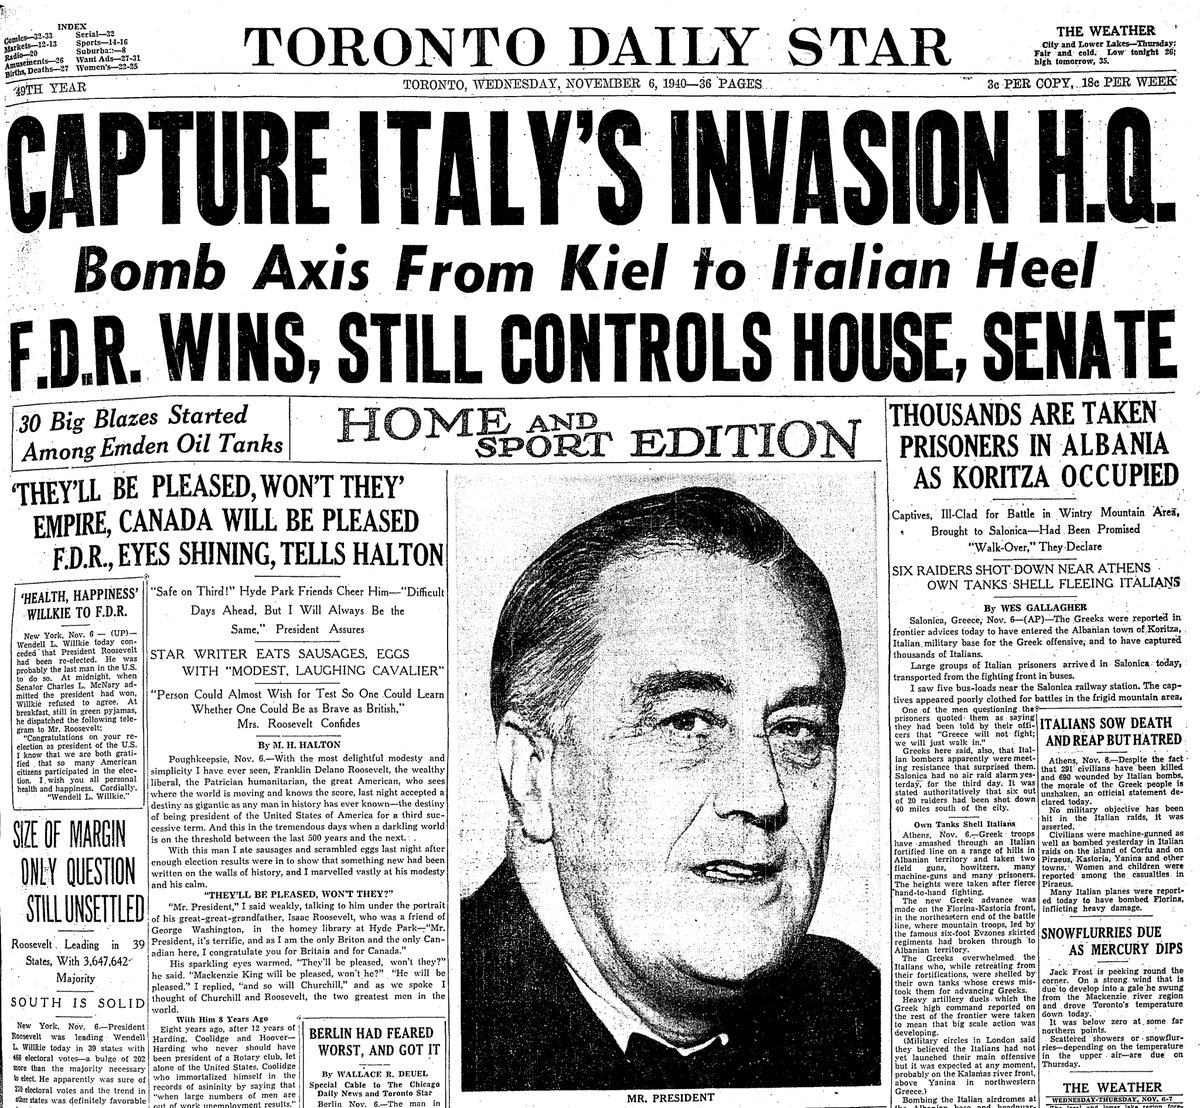 1940: The U.S. has not yet entered the Second World War, which dominates the headlines. FDR wins an unprecedented third term. The Star is proud that its reporter shared a meal of sausage and eggs with the president on election night in his library at Hyde Park.